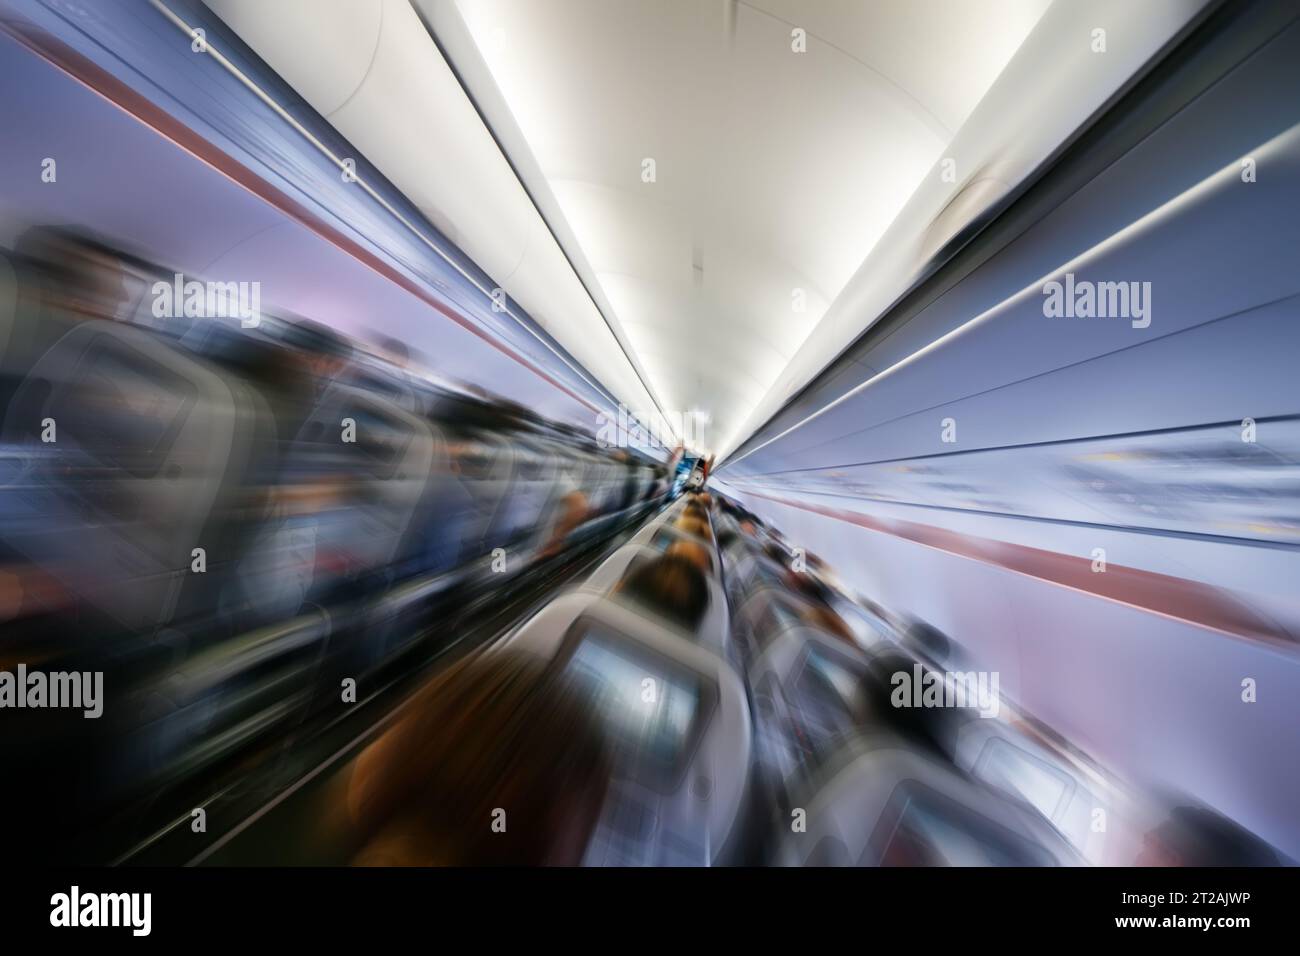 The interior of a plane in movement with speed effect Stock Photo